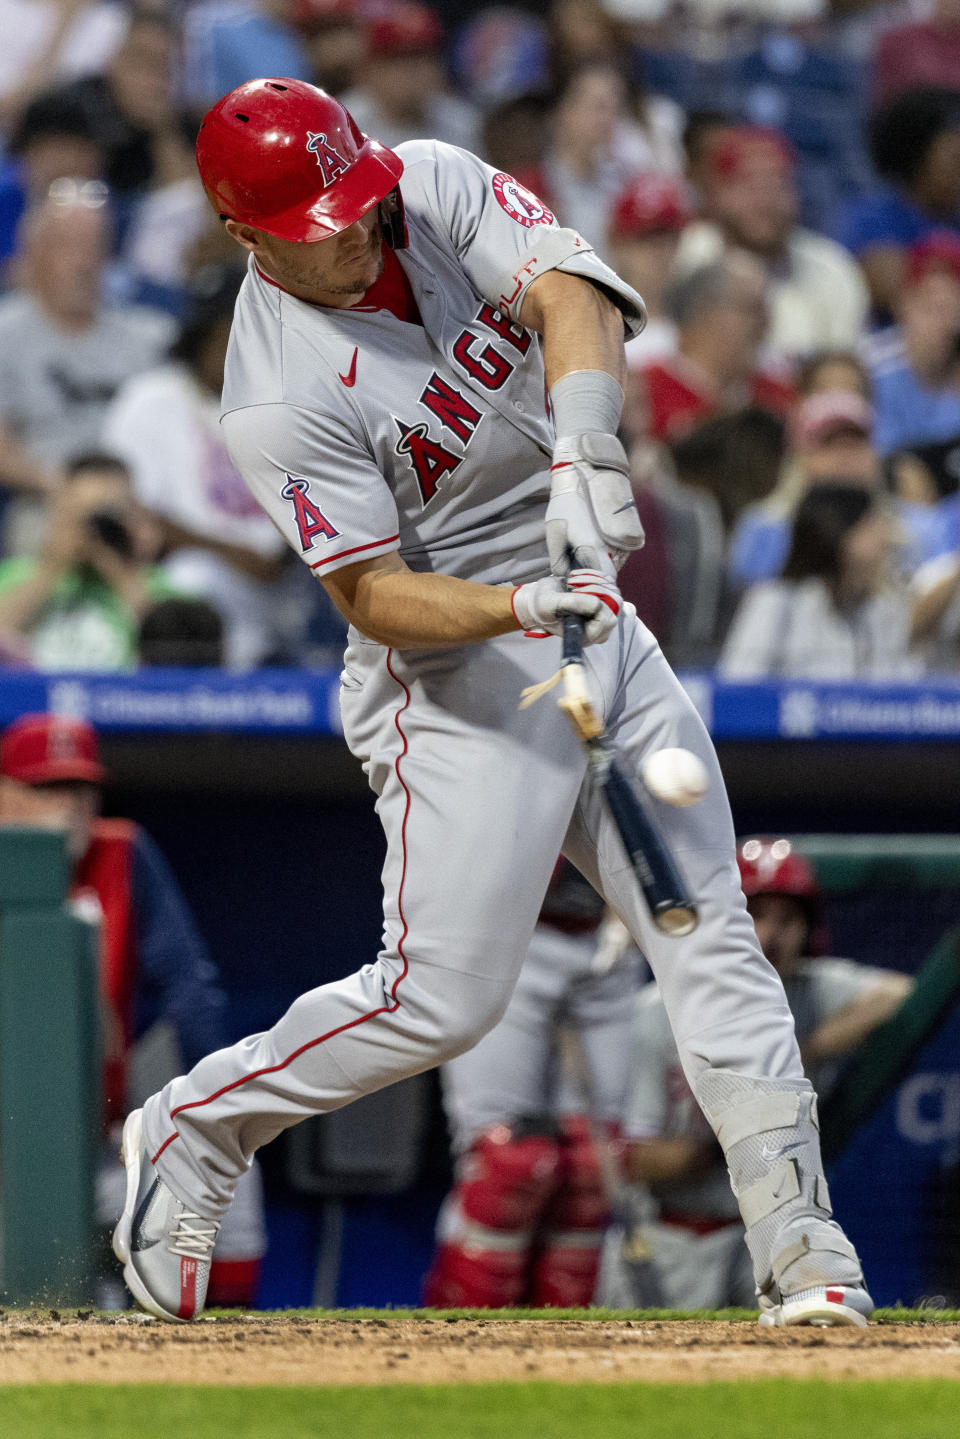 CORRECTS INNING AND RESULT OF AT-BAT - Los Angeles Angels' Mike Trout breaks his bat while hitting a ground ball during the third inning of the team's baseball game against the Philadelphia Phillies, Saturday, June 4, 2022, in Philadelphia. Shohei Ohtani was forced out at second, and Trout reached first. (AP Photo/Laurence Kesterson)